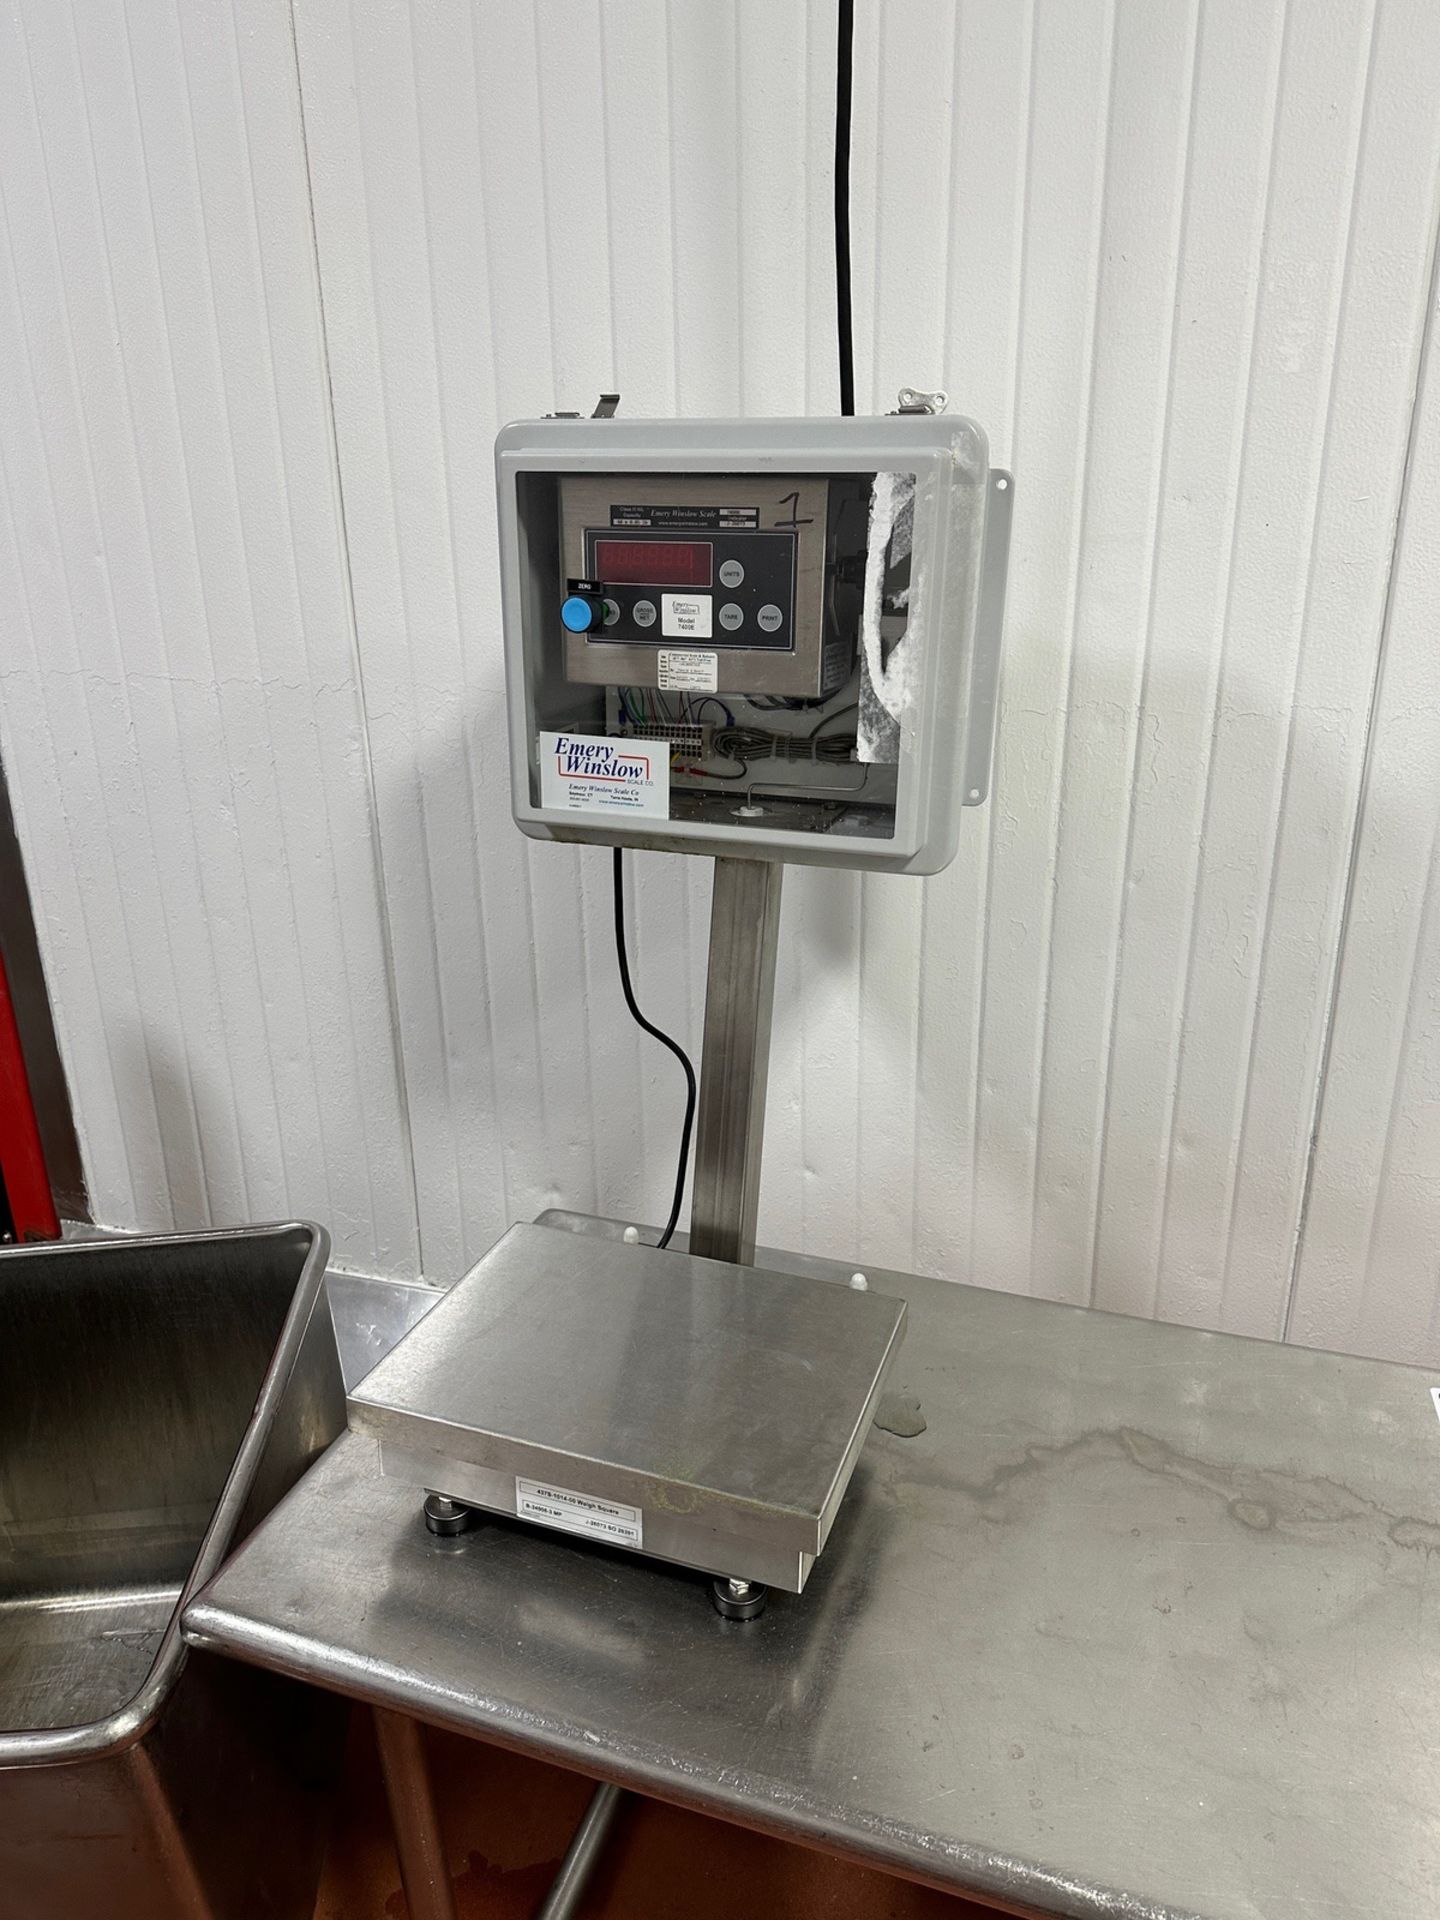 Emery Winslow Stainless Bench Top Scale, Model 7400E, 18"x18", 437S-1014-50 Weigh S | Rig Fee $25